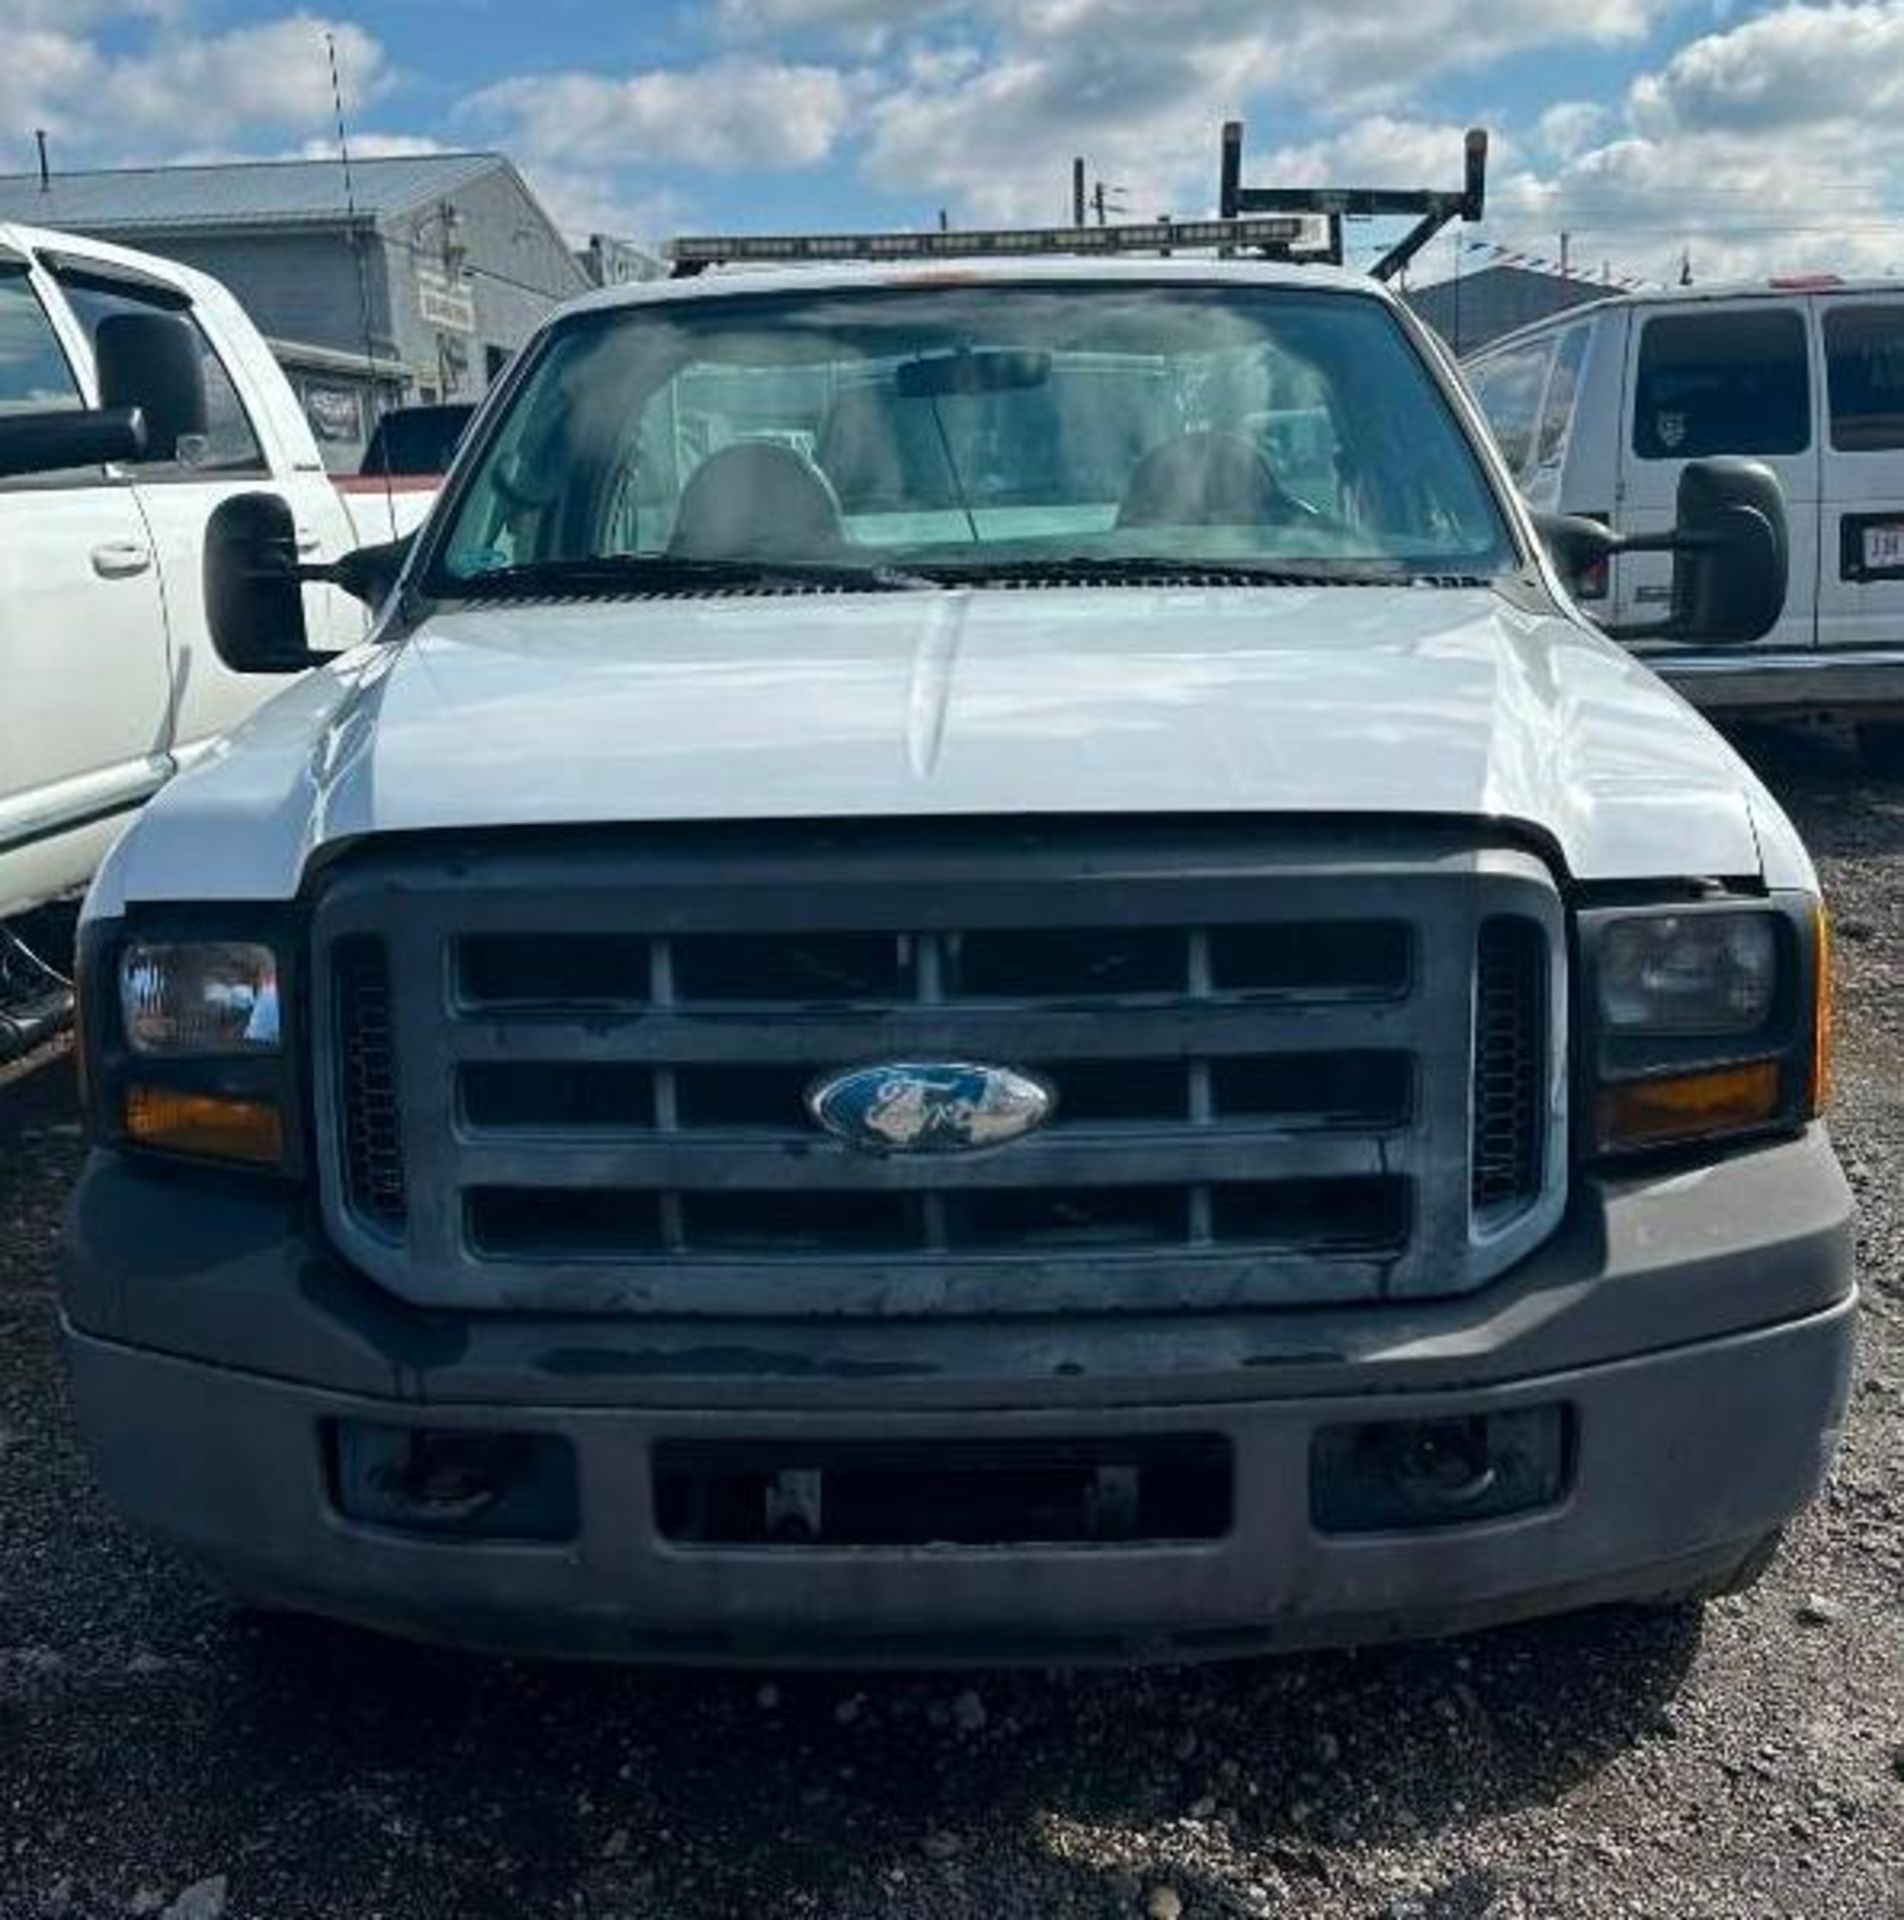 2007 Ford F-250 Pickup Truck (located off-site, please read description) - Image 2 of 11